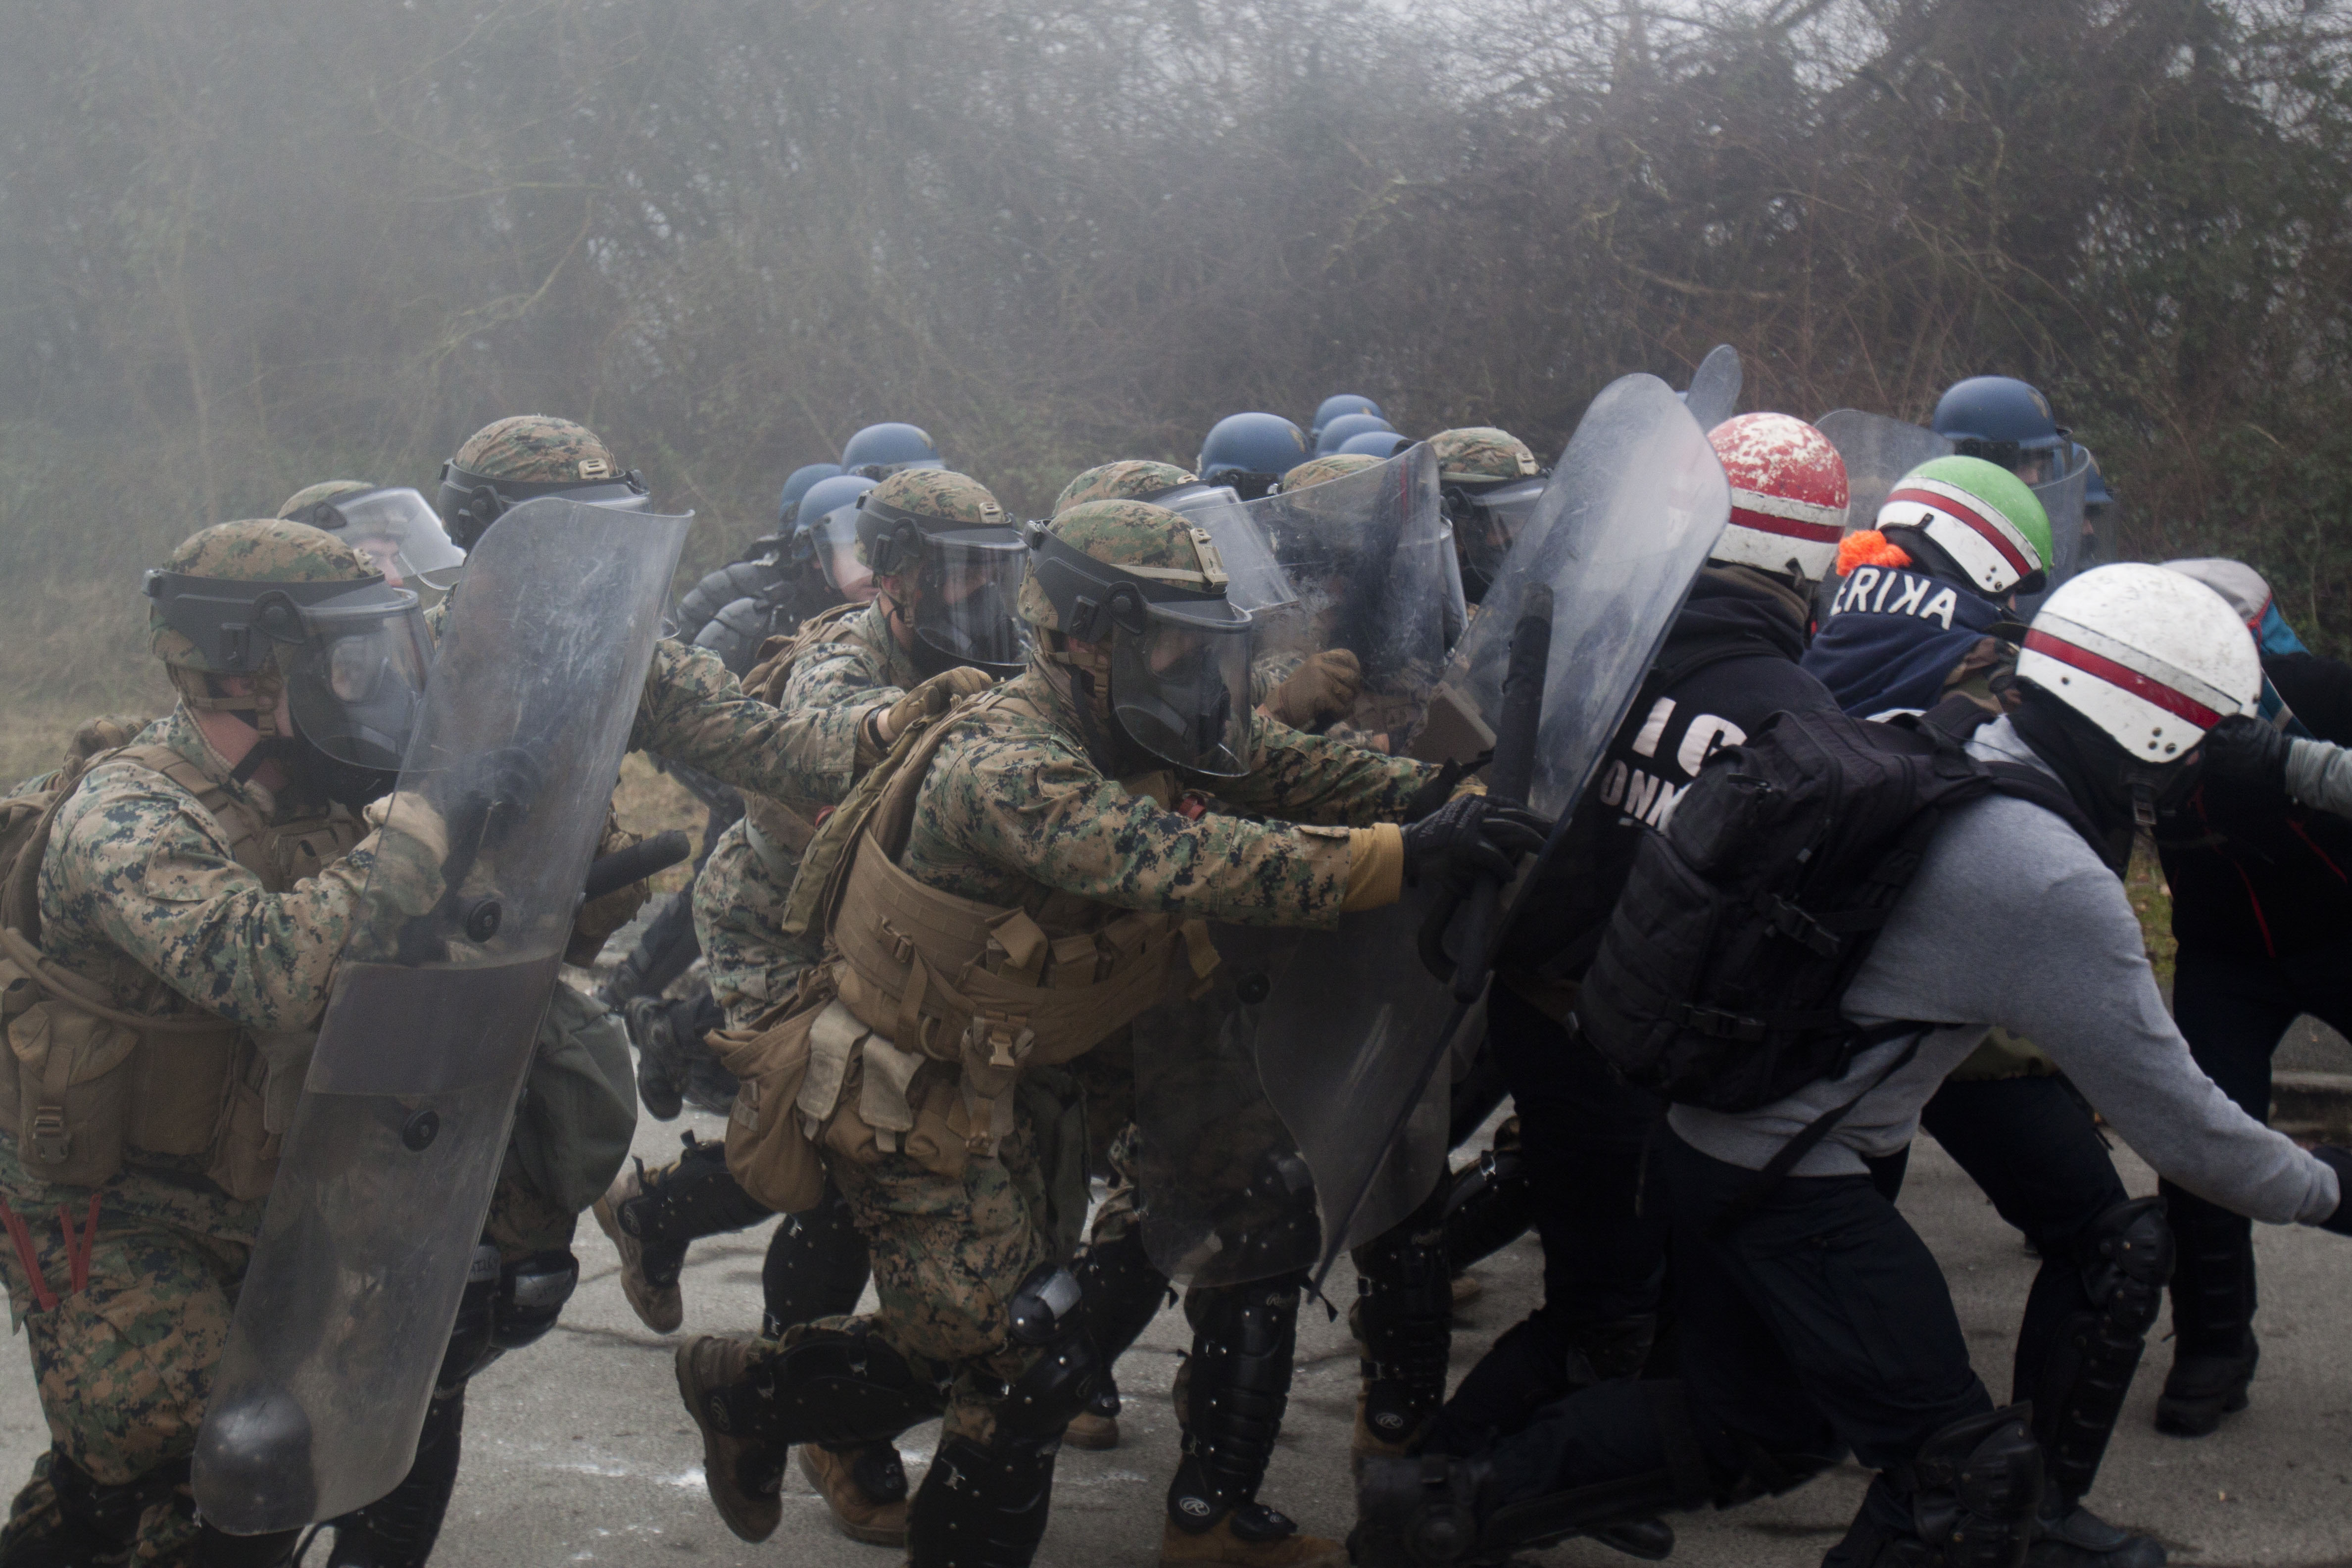 6 Times the Military Was Used for Riot Control in the US